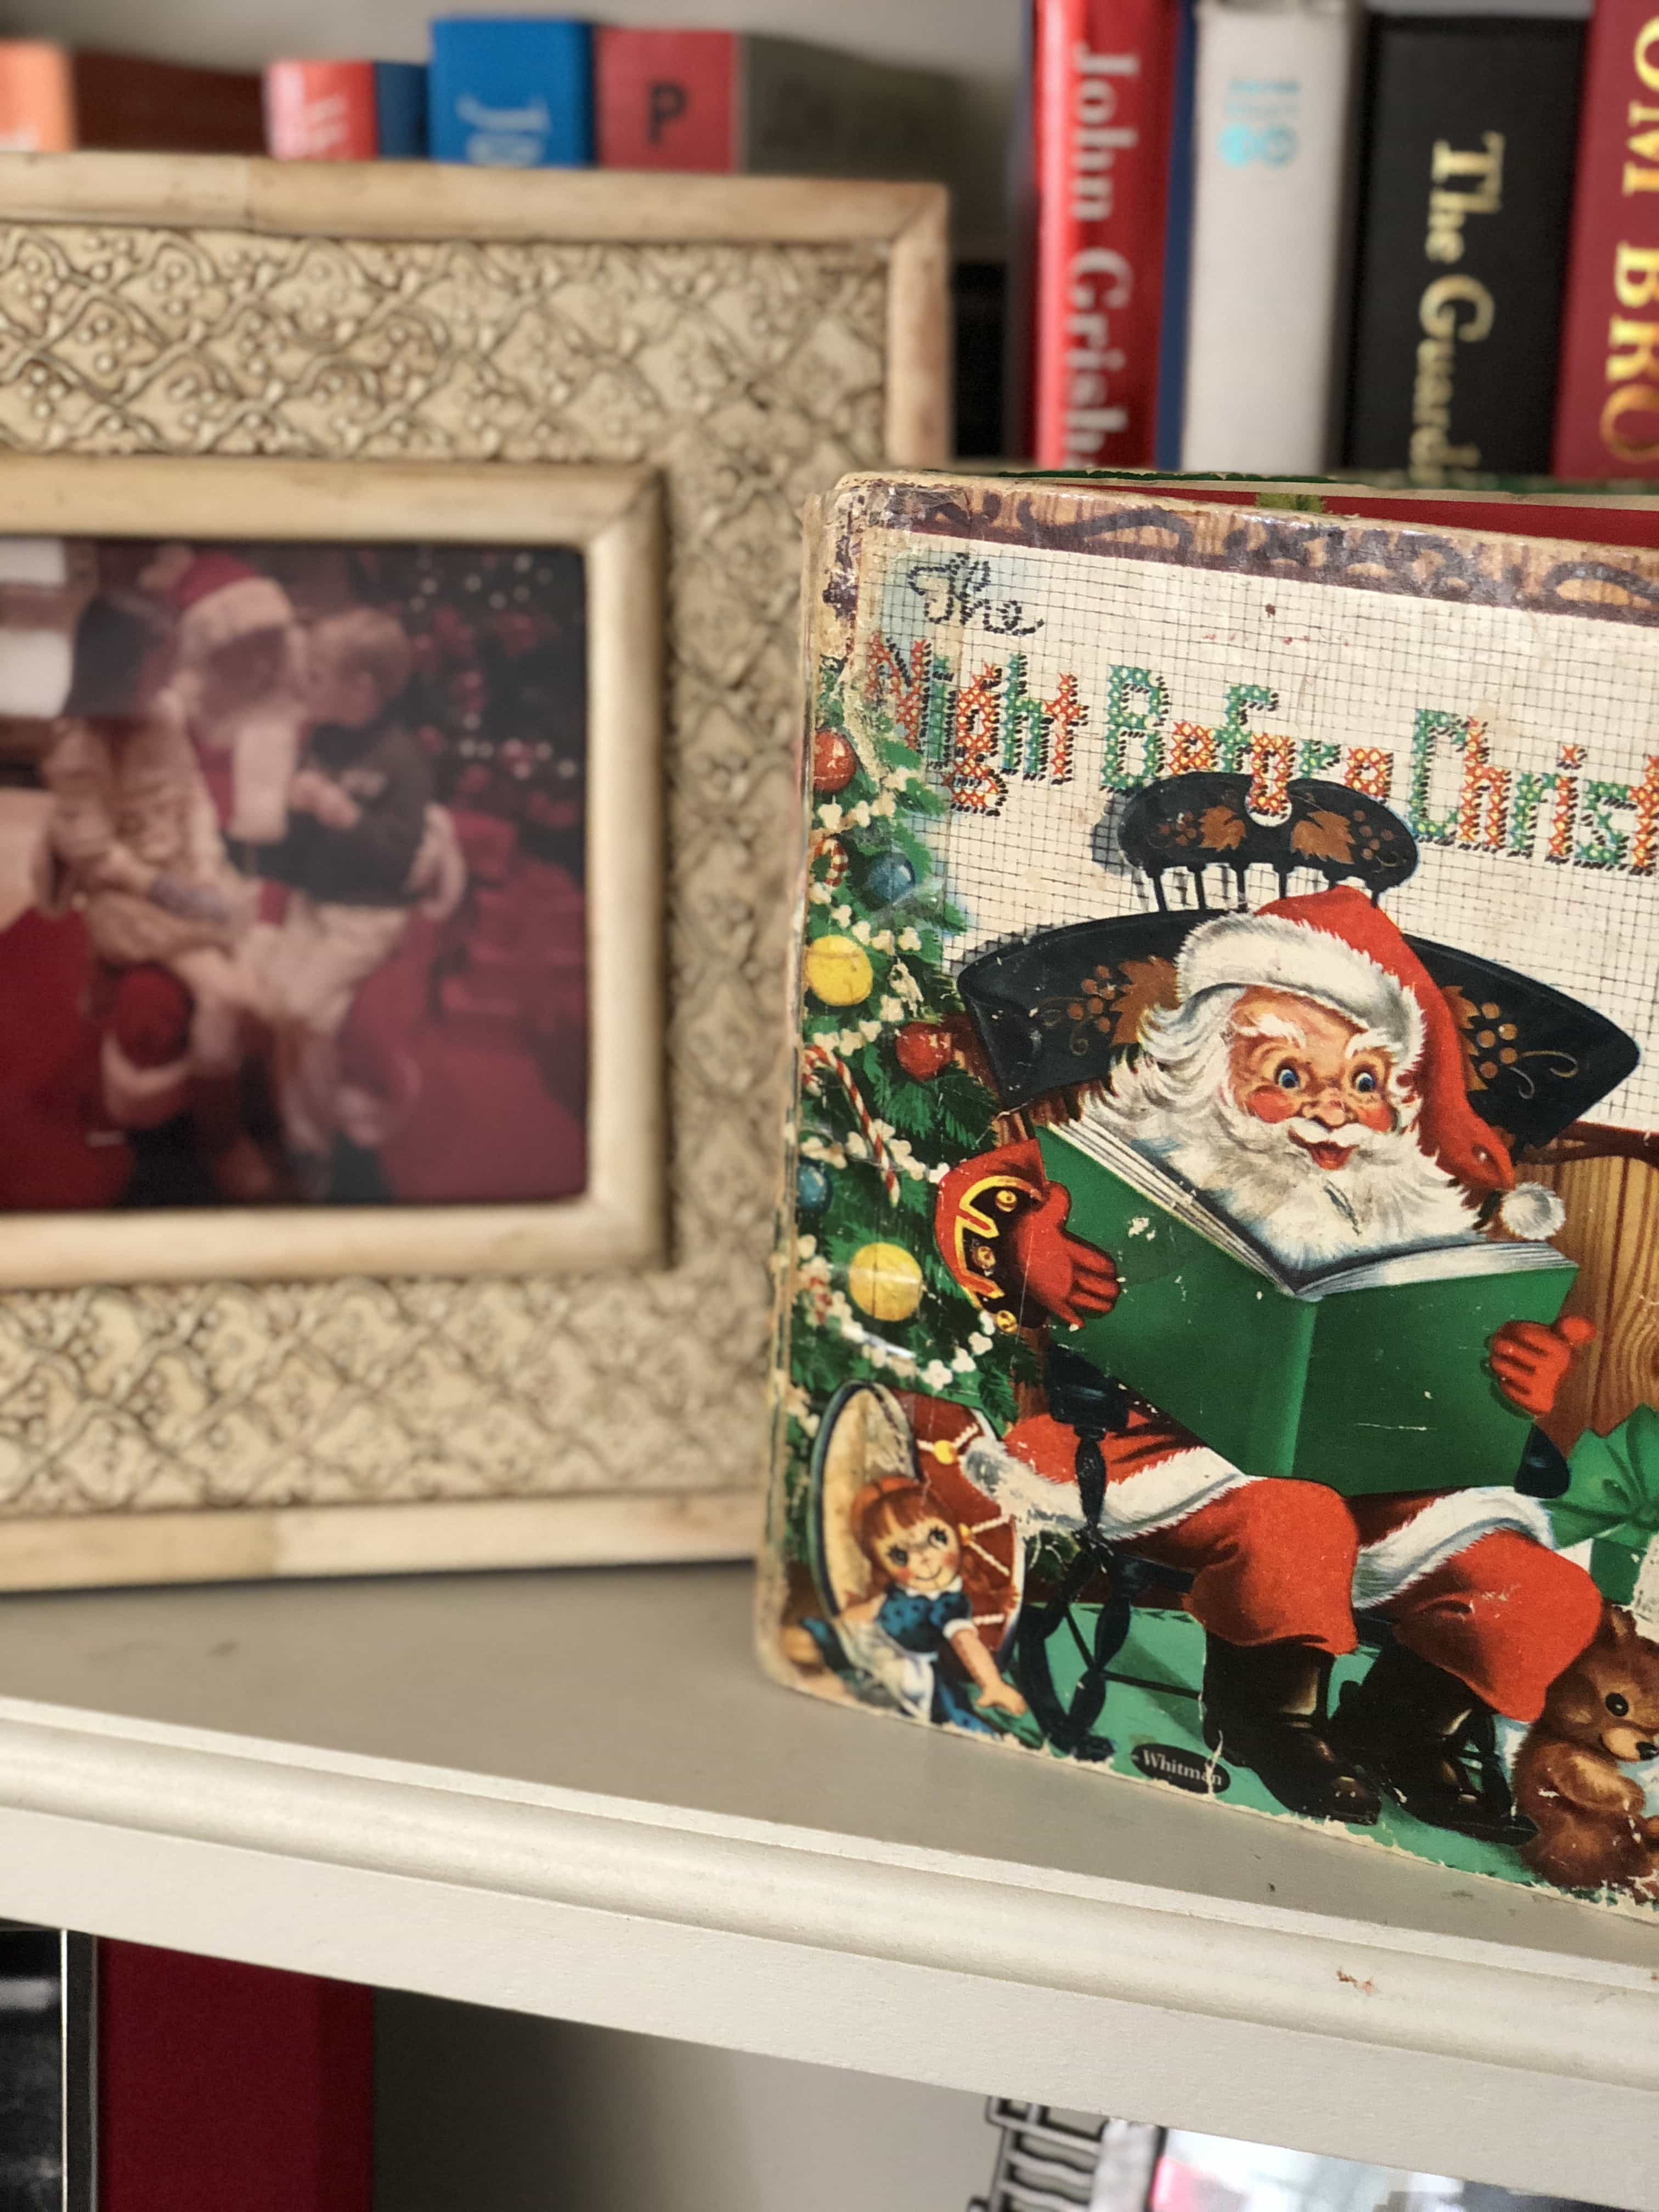 Putting the Focus on Holiday Traditions That Matter